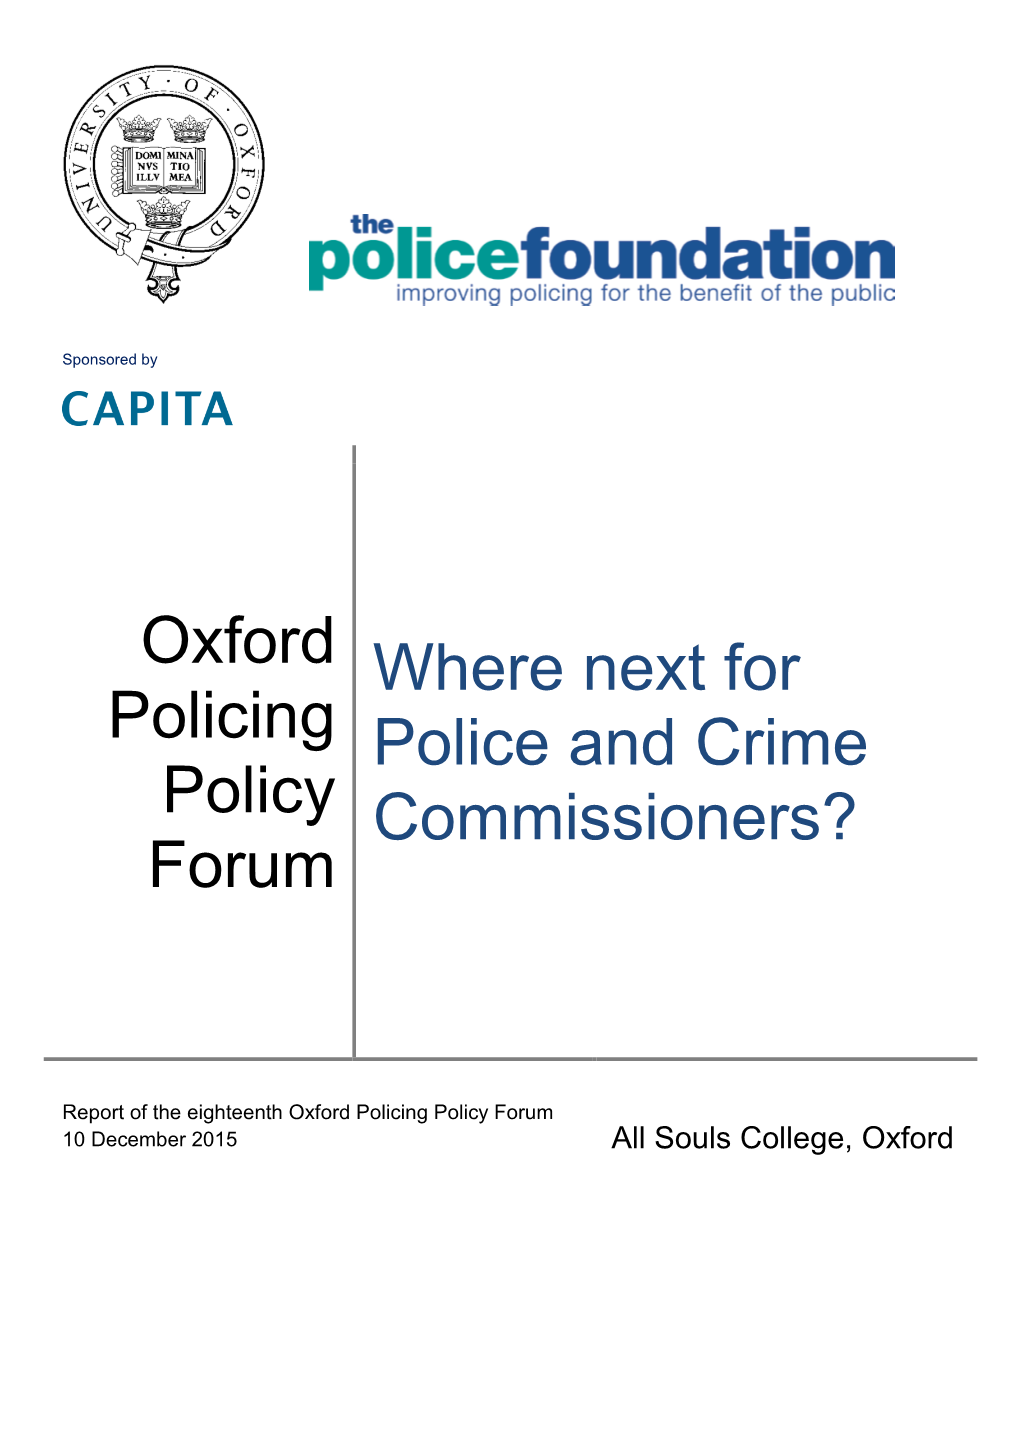 Oxford Policing Policy Forum Where Next for Police and Crime